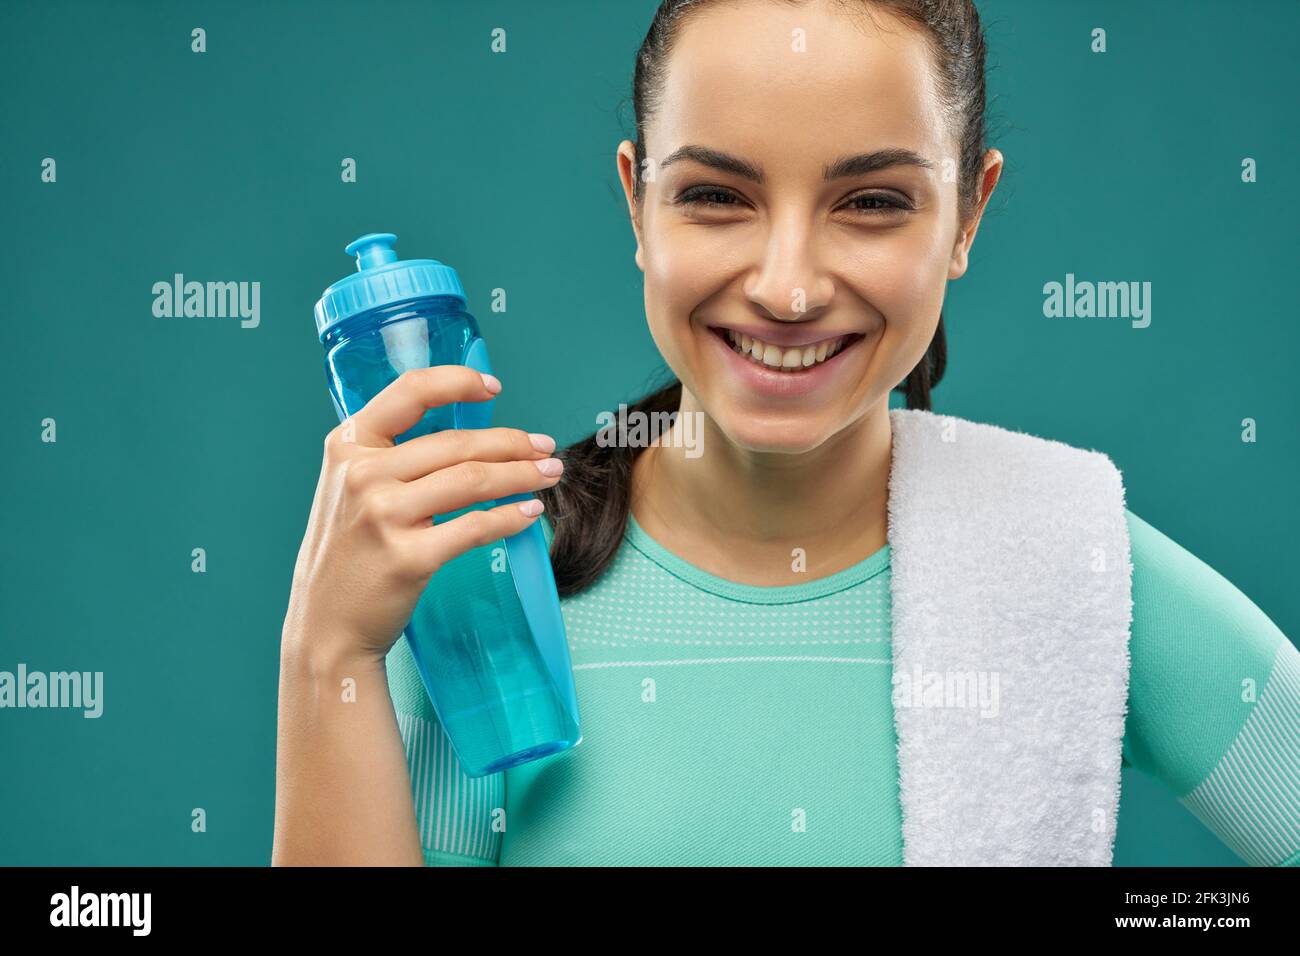 Cheerful young woman holding bottle of water Stock Photo